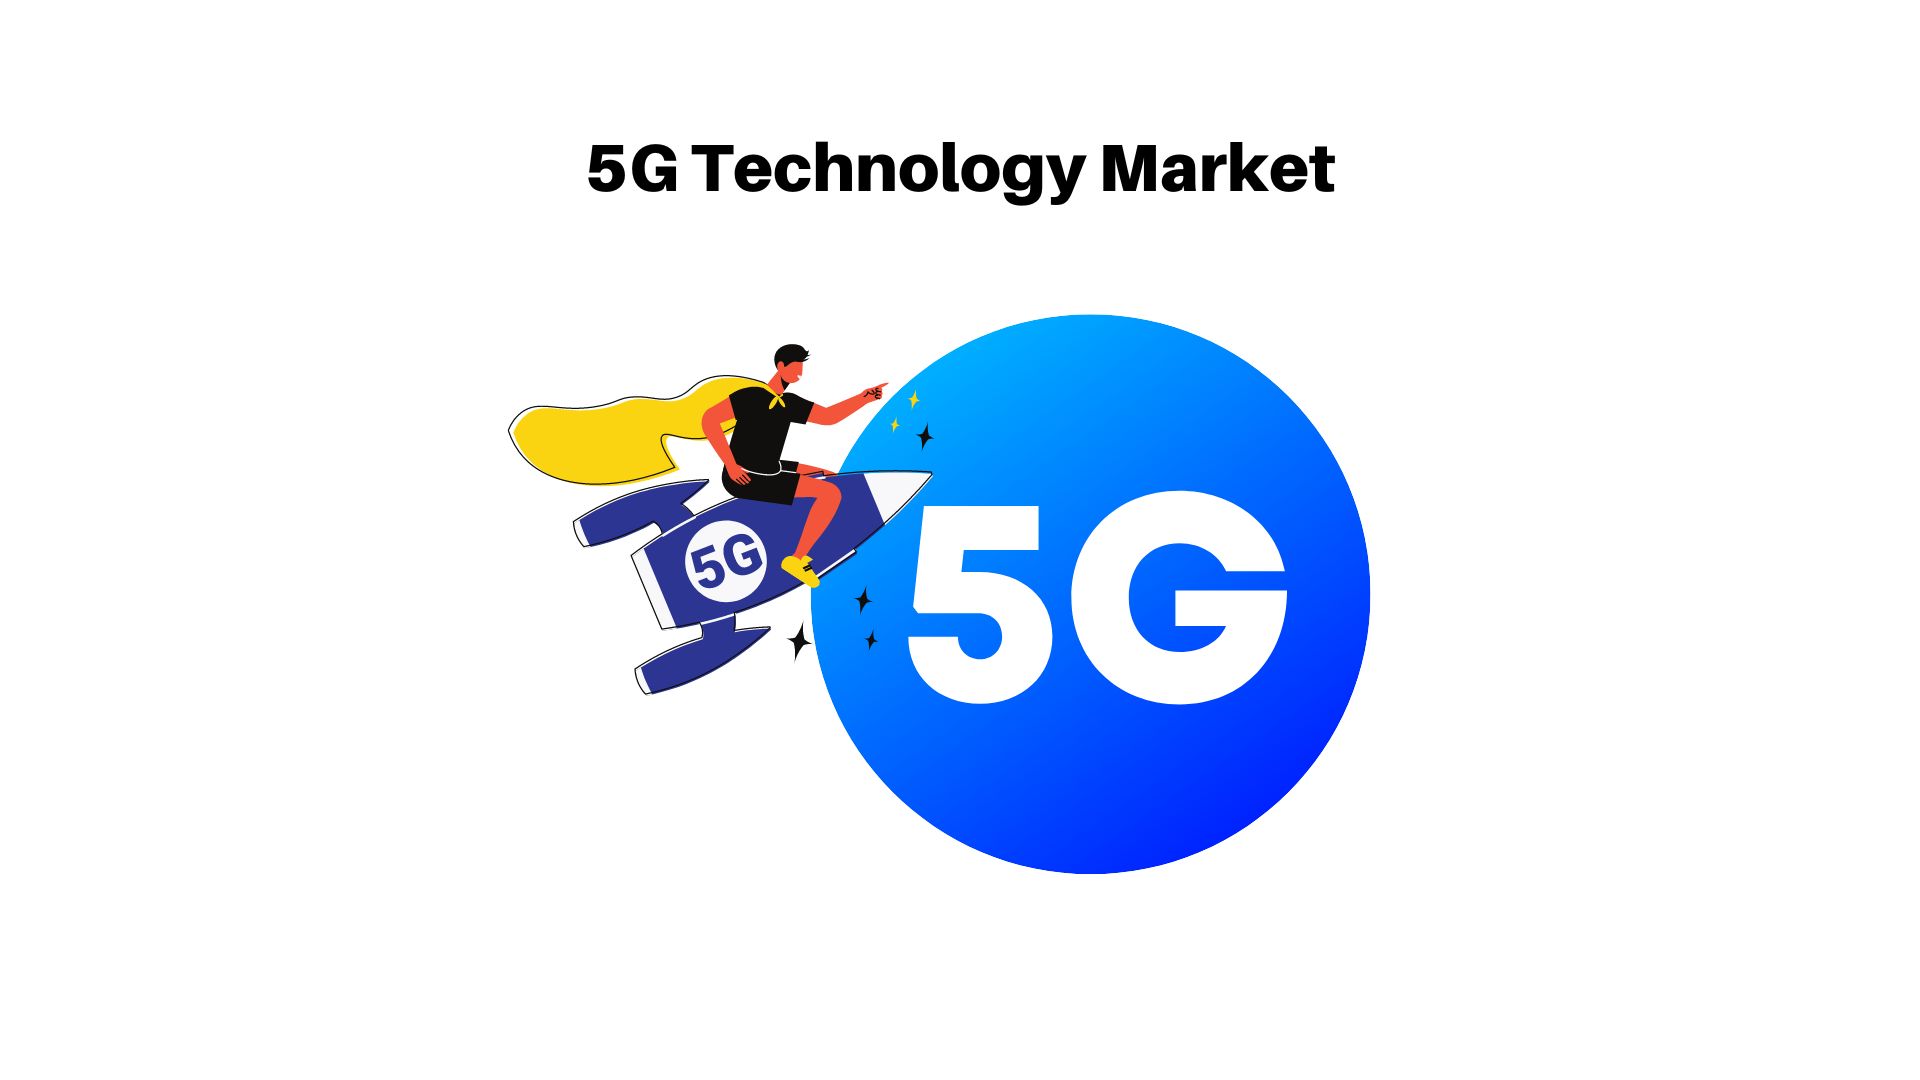 Global 5G Technology Market is expected to reach USD 1151.77 Bn by 2033 | CAGR of 60.1%